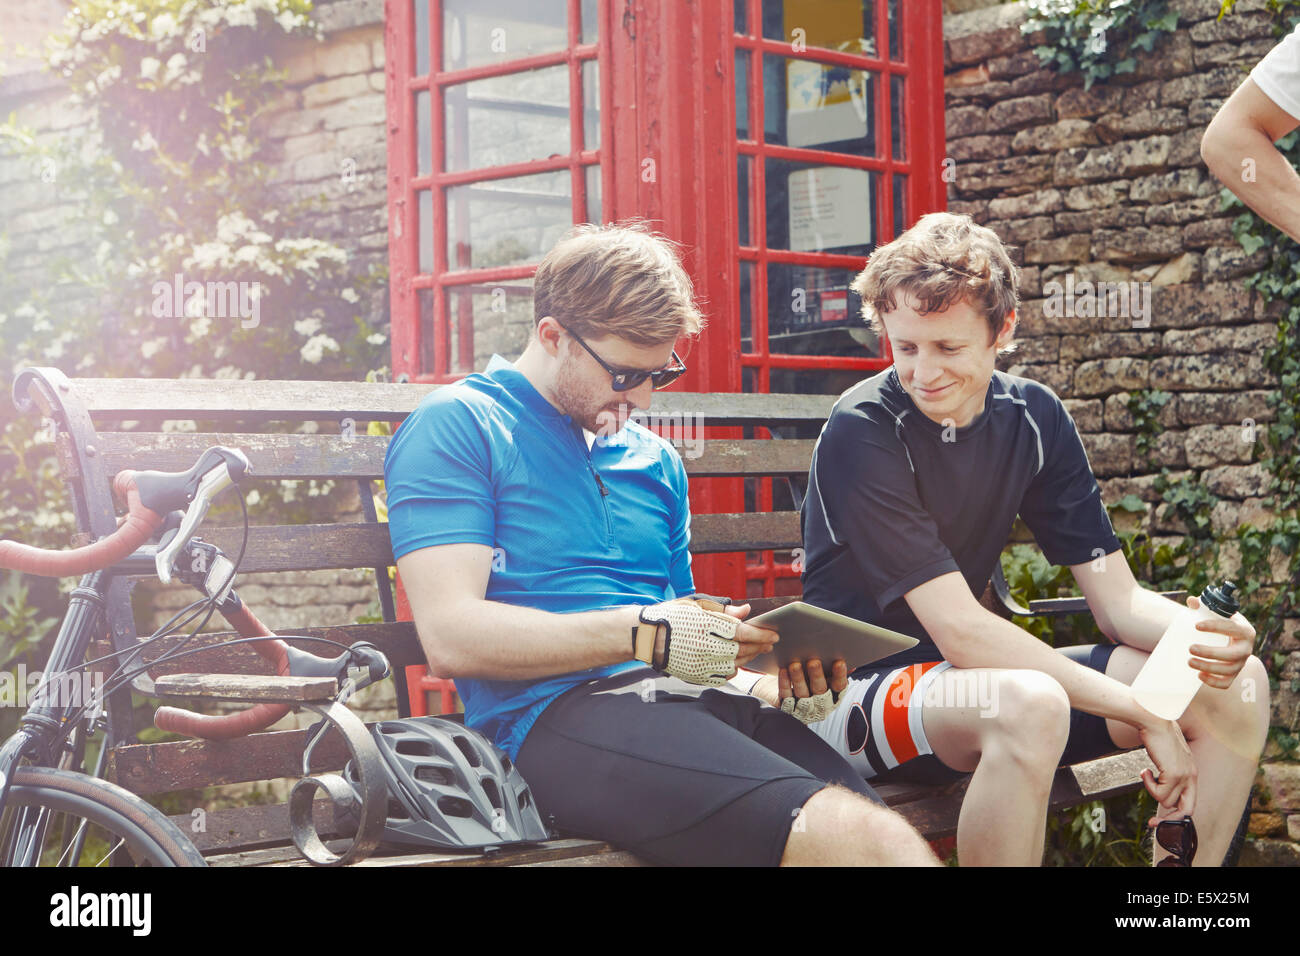 Cyclists using digital tablet by red telephone box, Cotswolds, UK Stock Photo